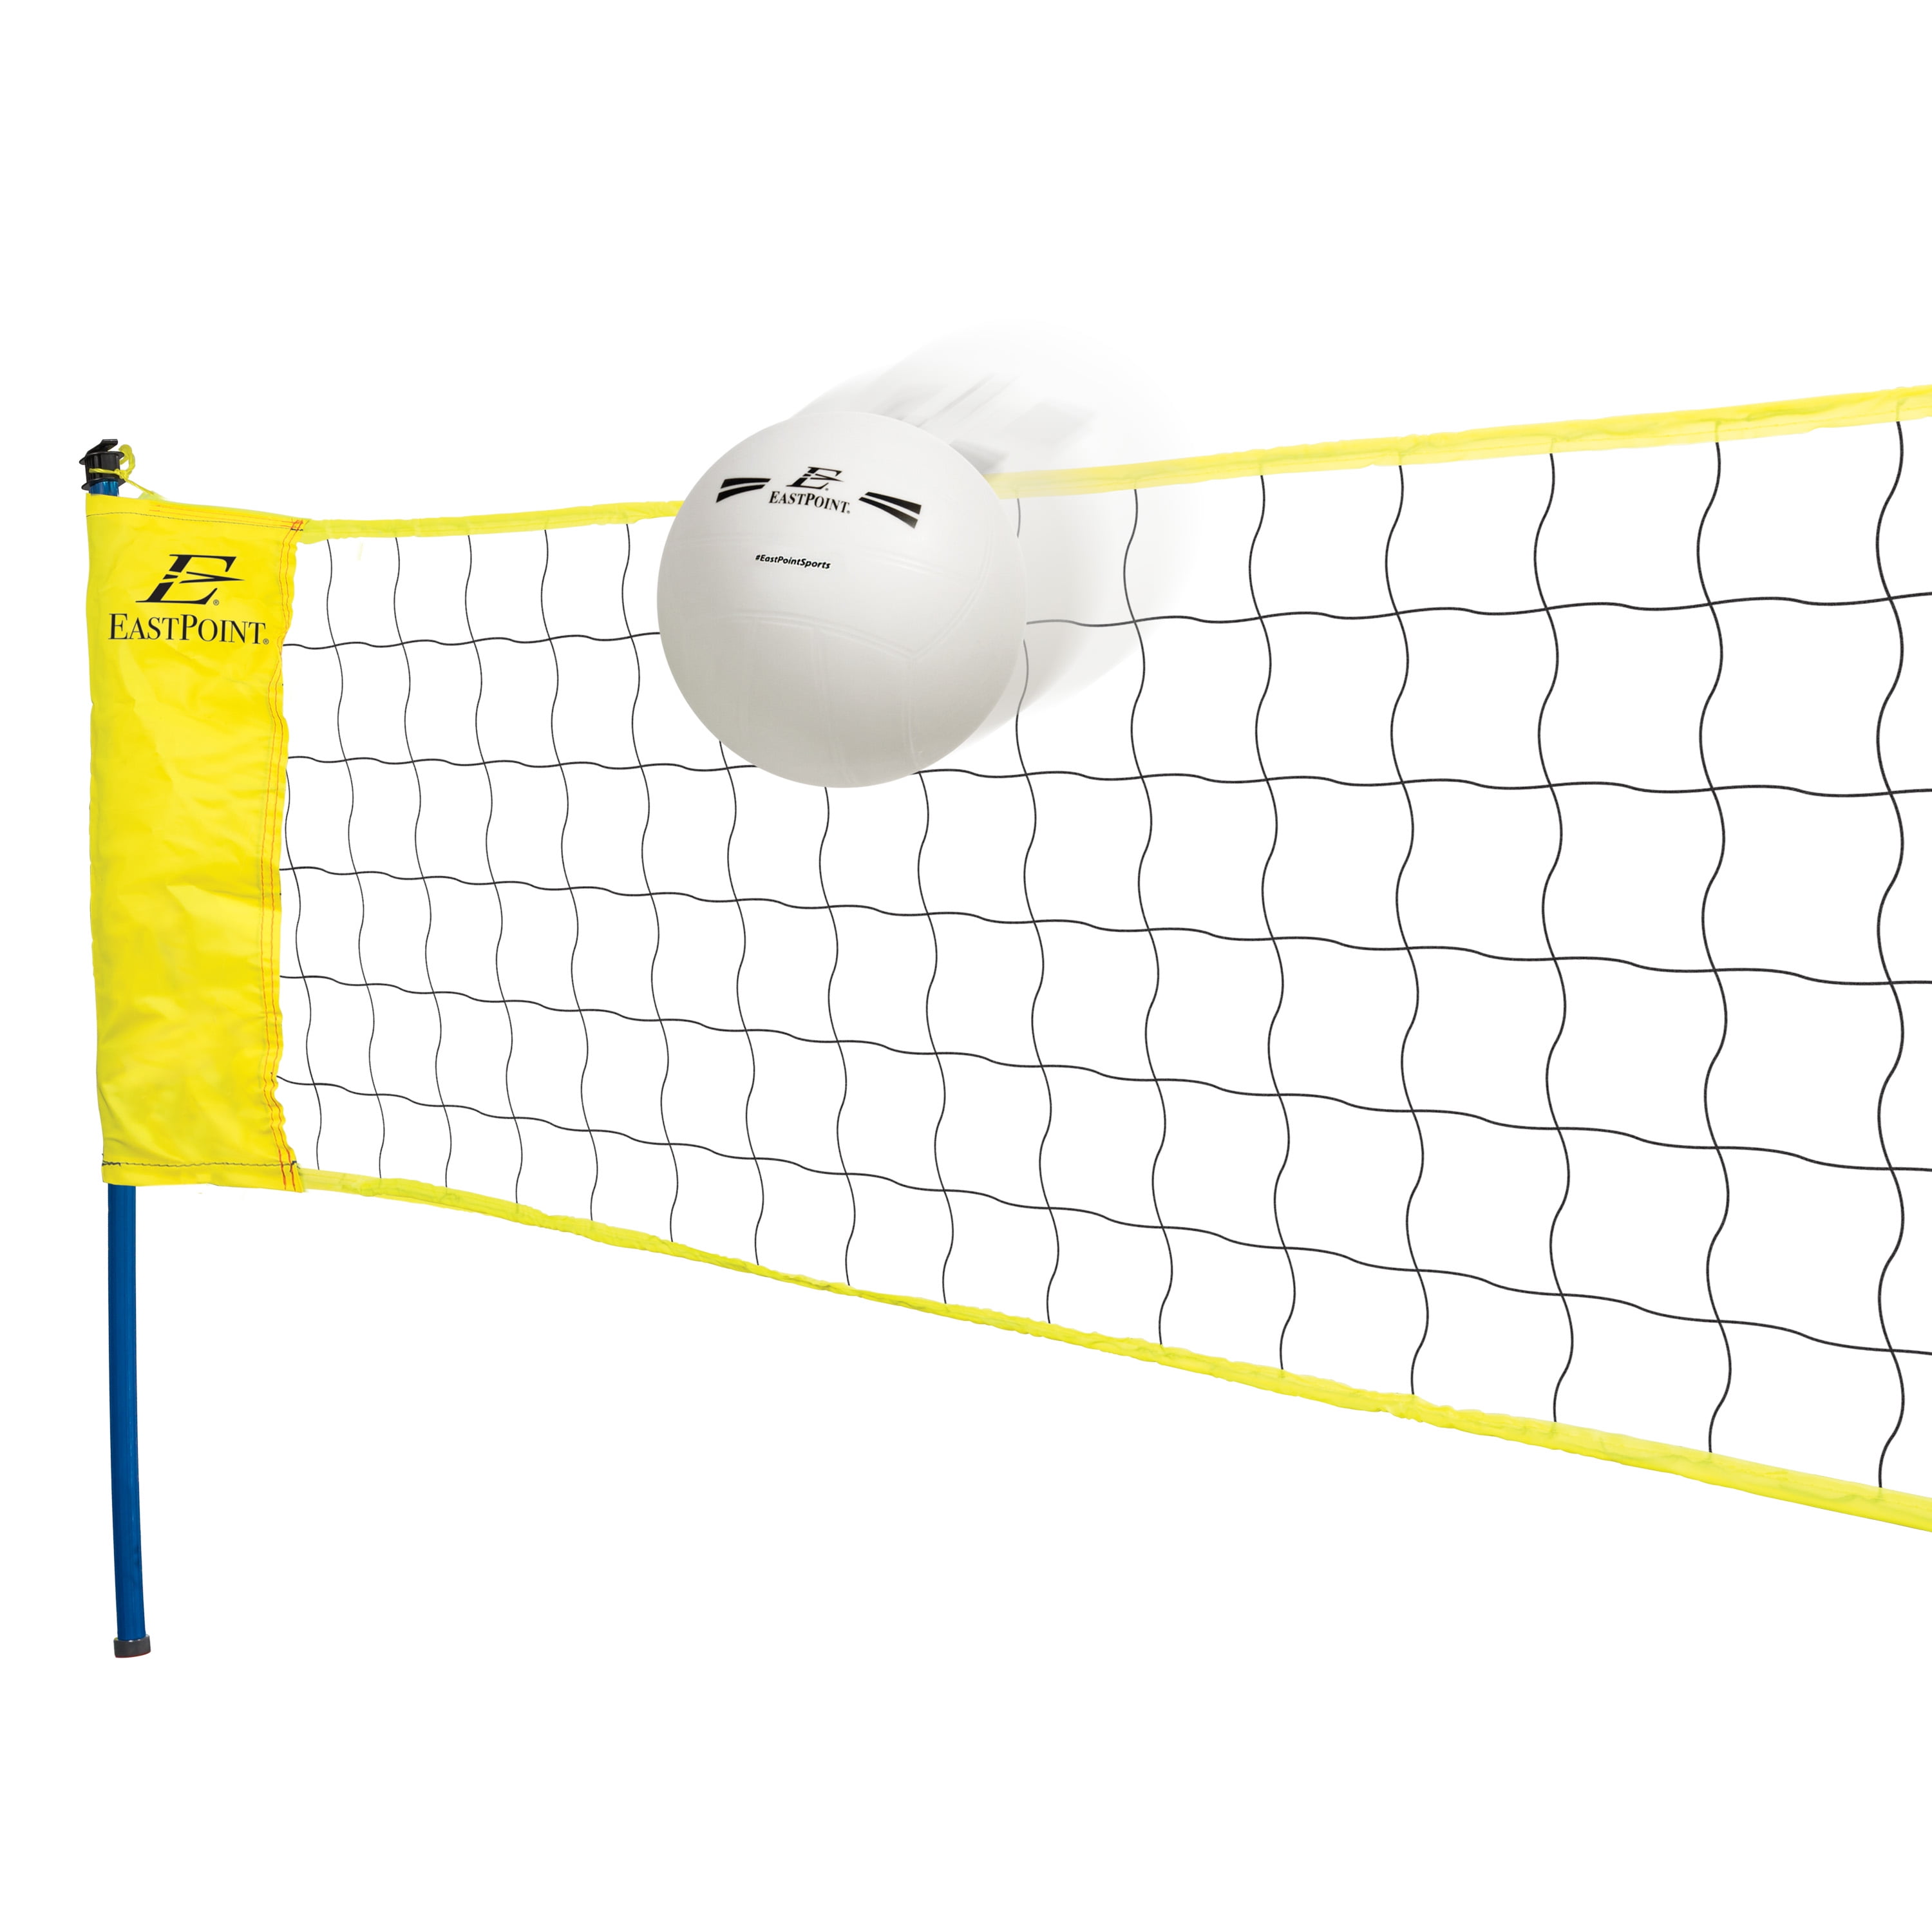 Hathaway Portable Volleyball Game Set for sale online 